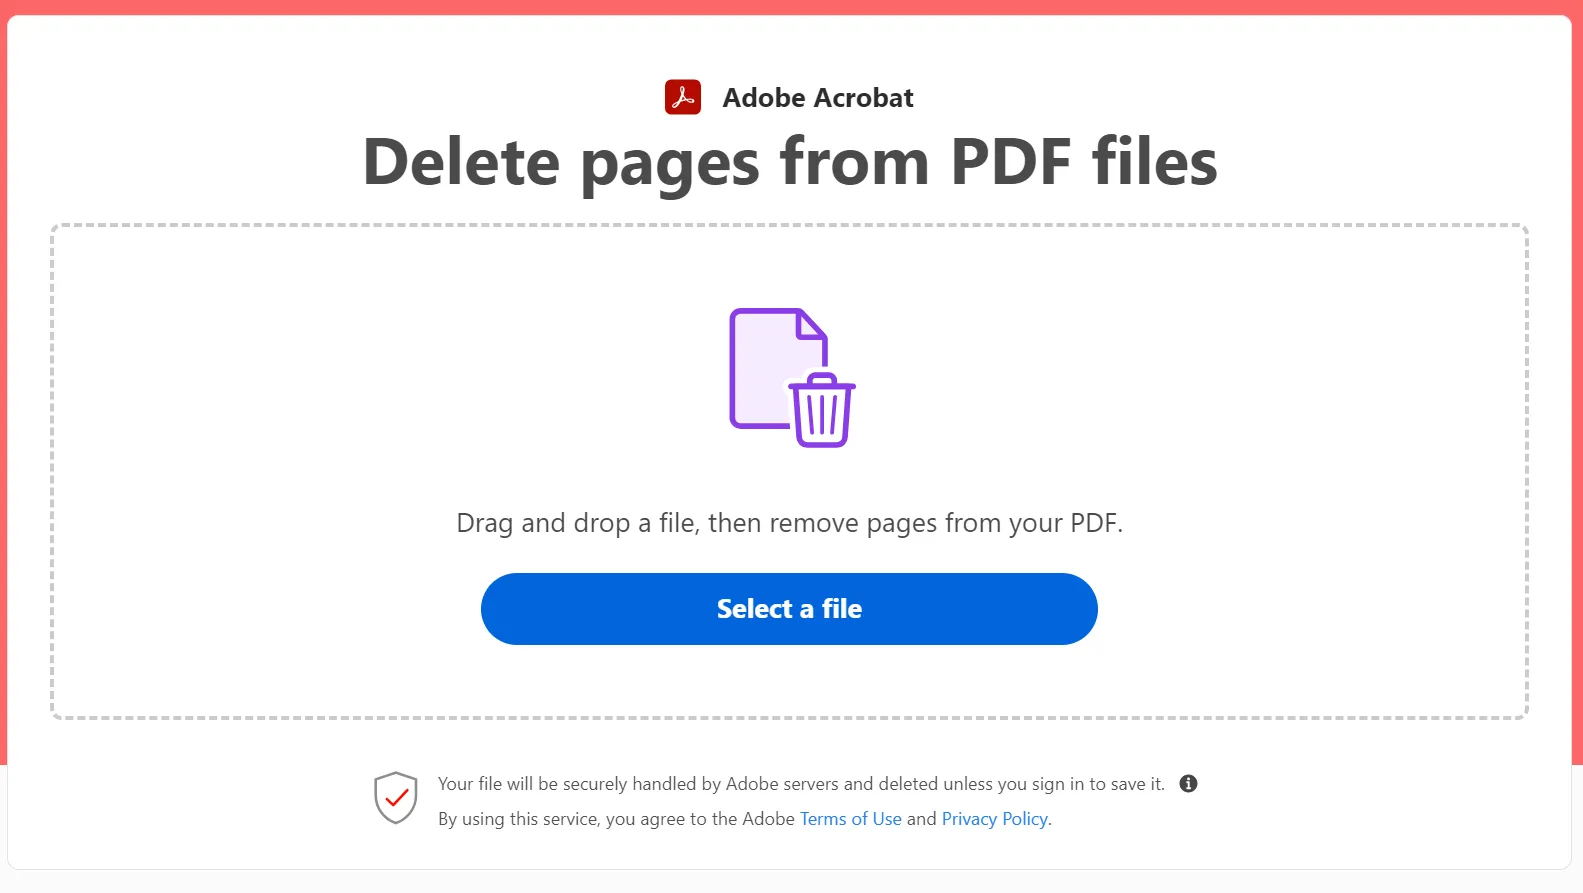 delete pages from pdf files in adobe acrobat